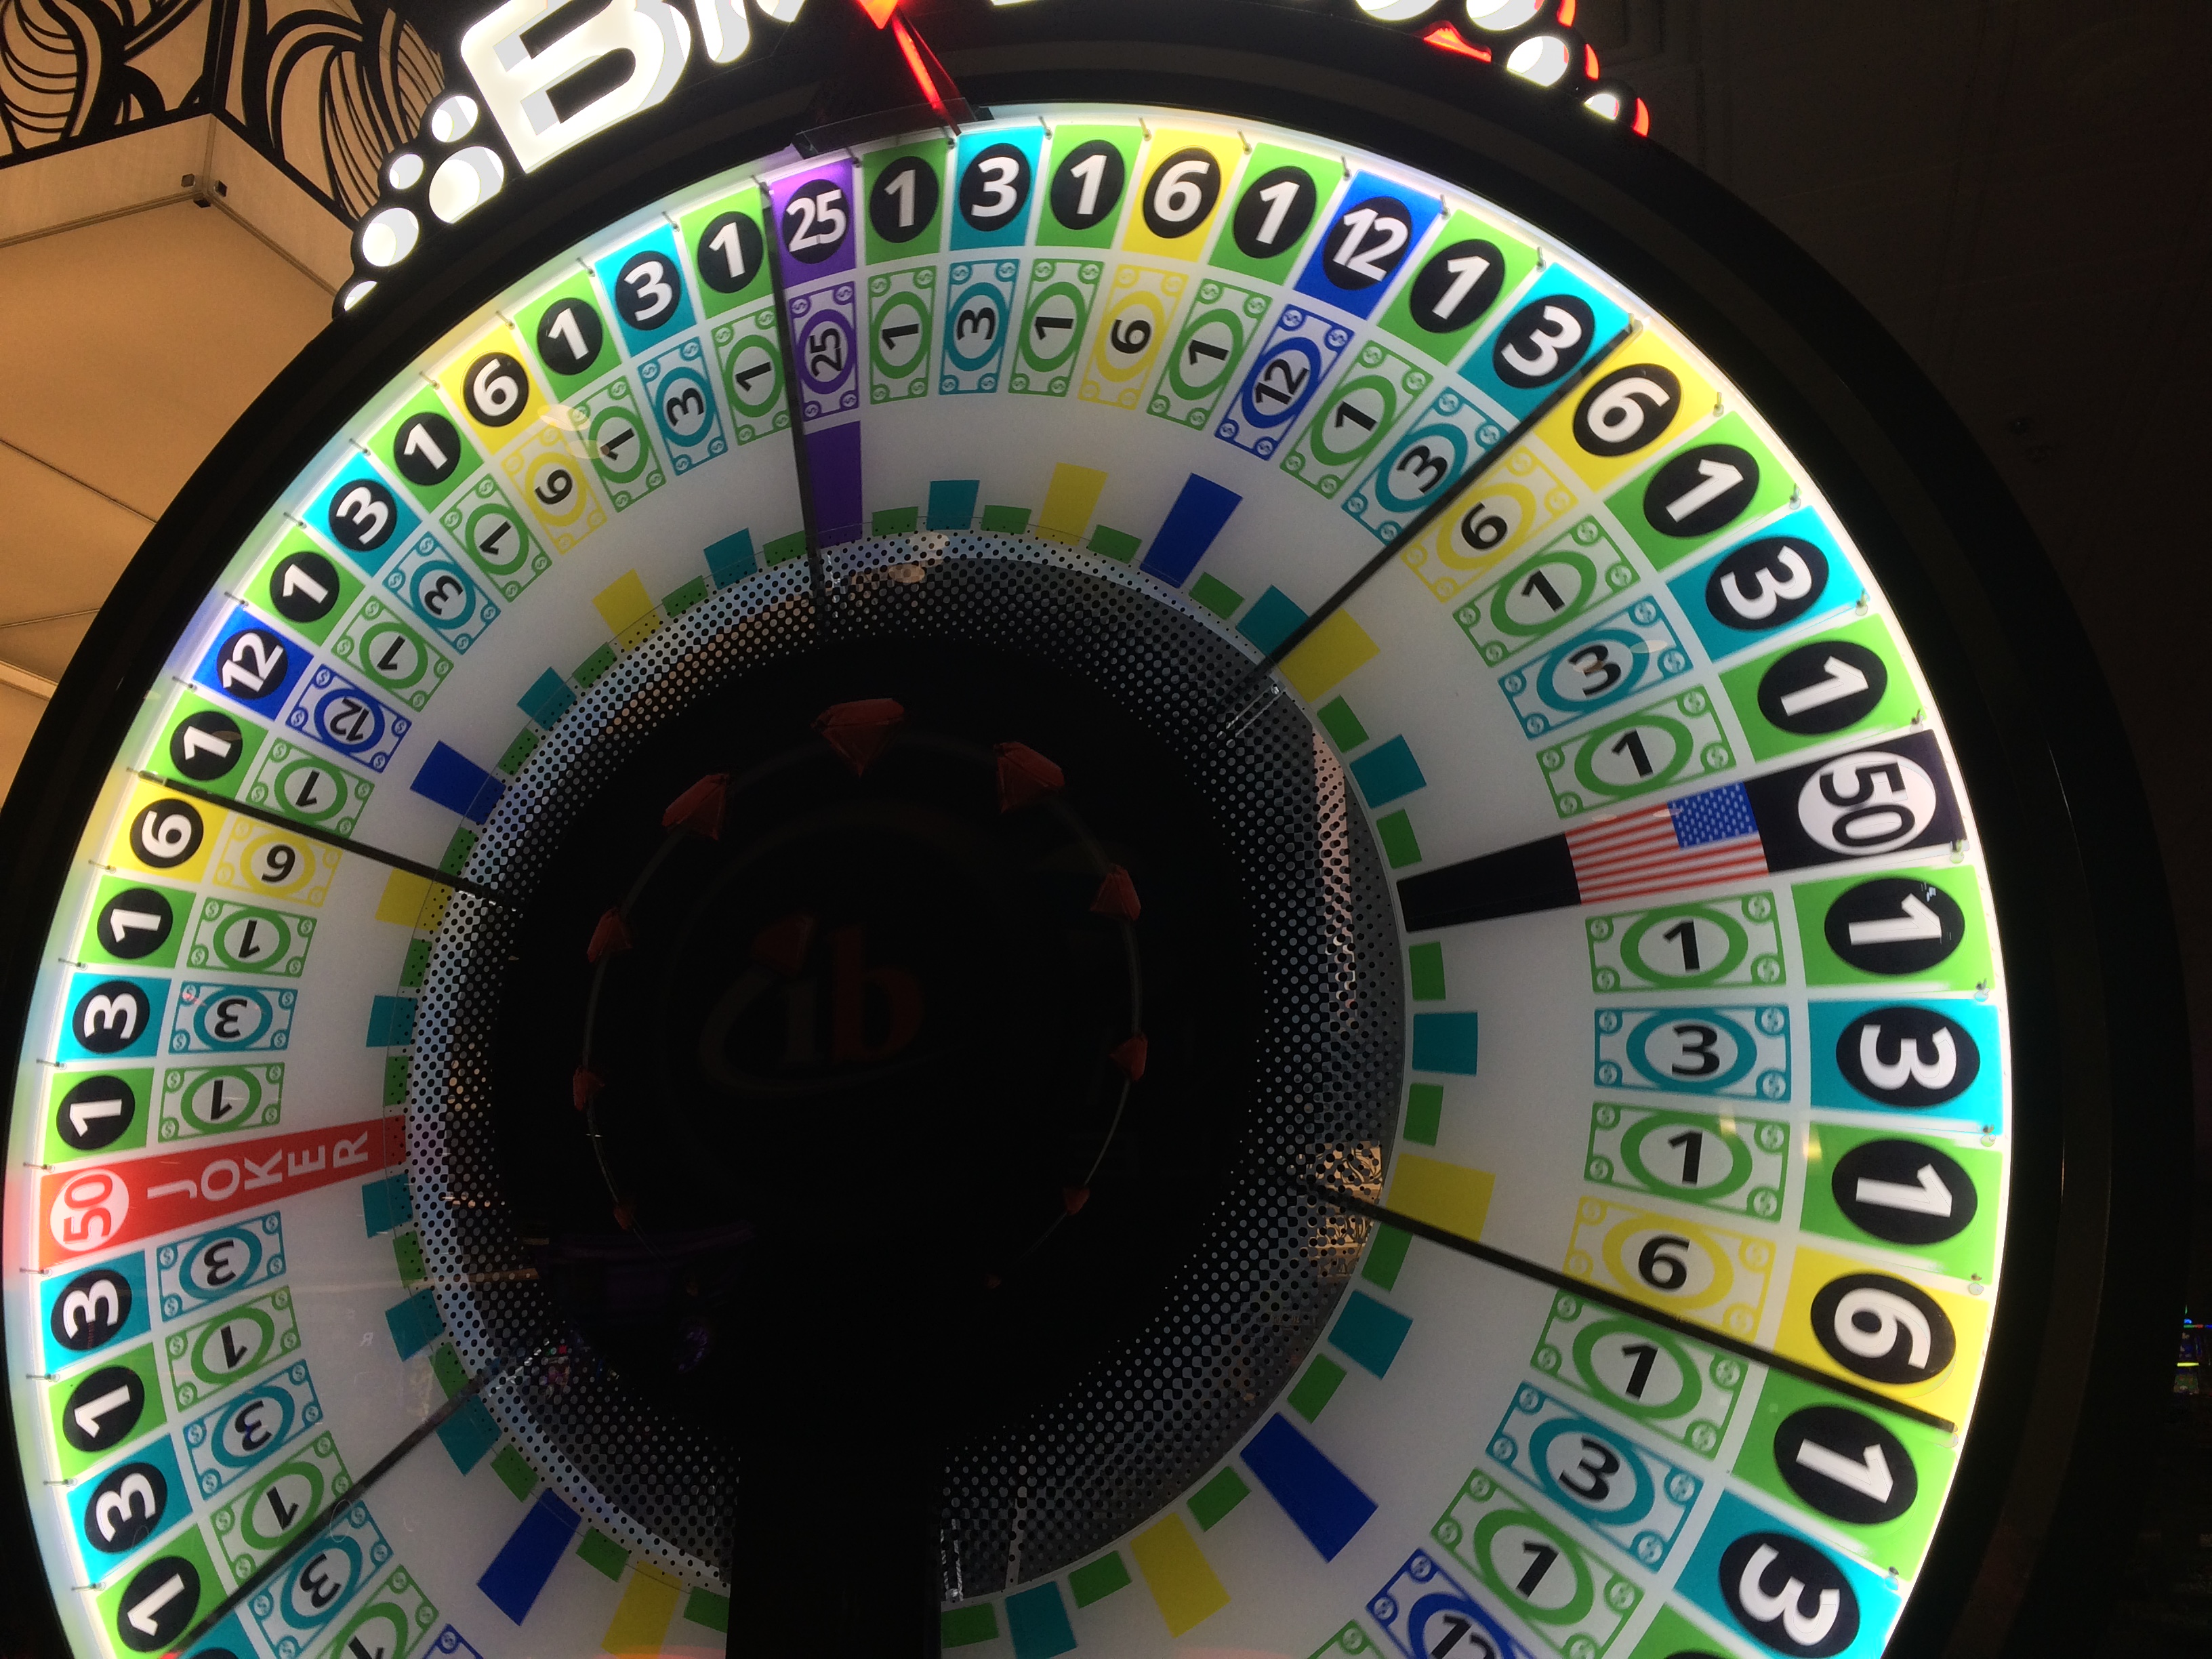 How to play big wheel in casino